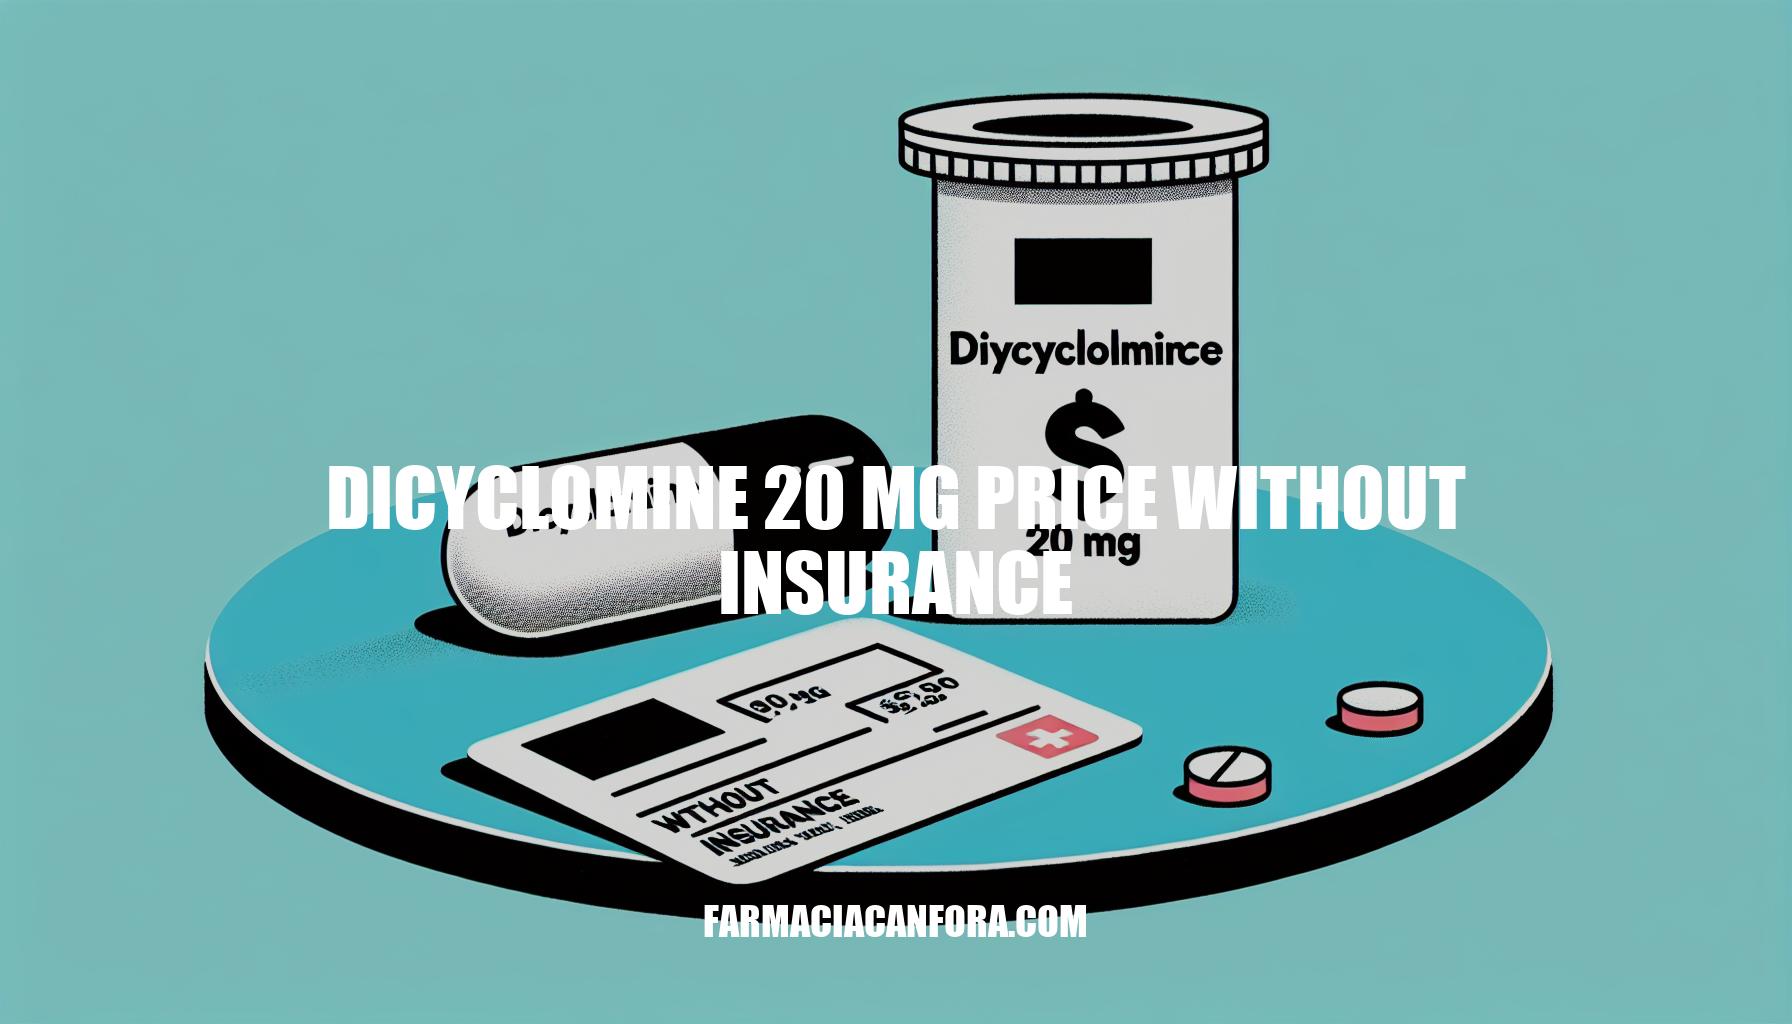 Dicyclomine 20 mg Price Without Insurance: What You Need to Know